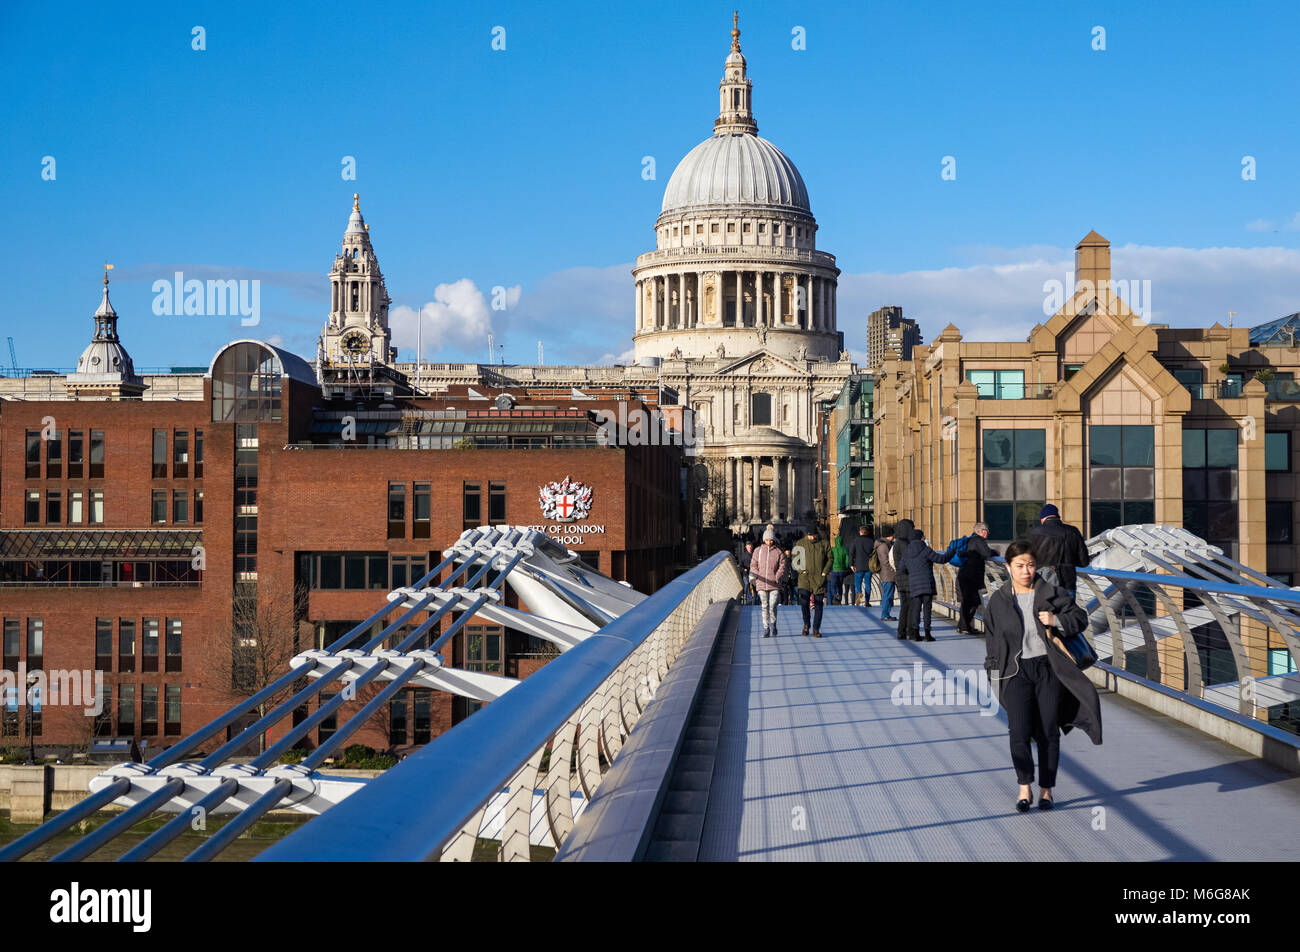 People on the Millennium Bridge with St Paul's Cathedral in the background, London England United Kingdom UK Stock Photo